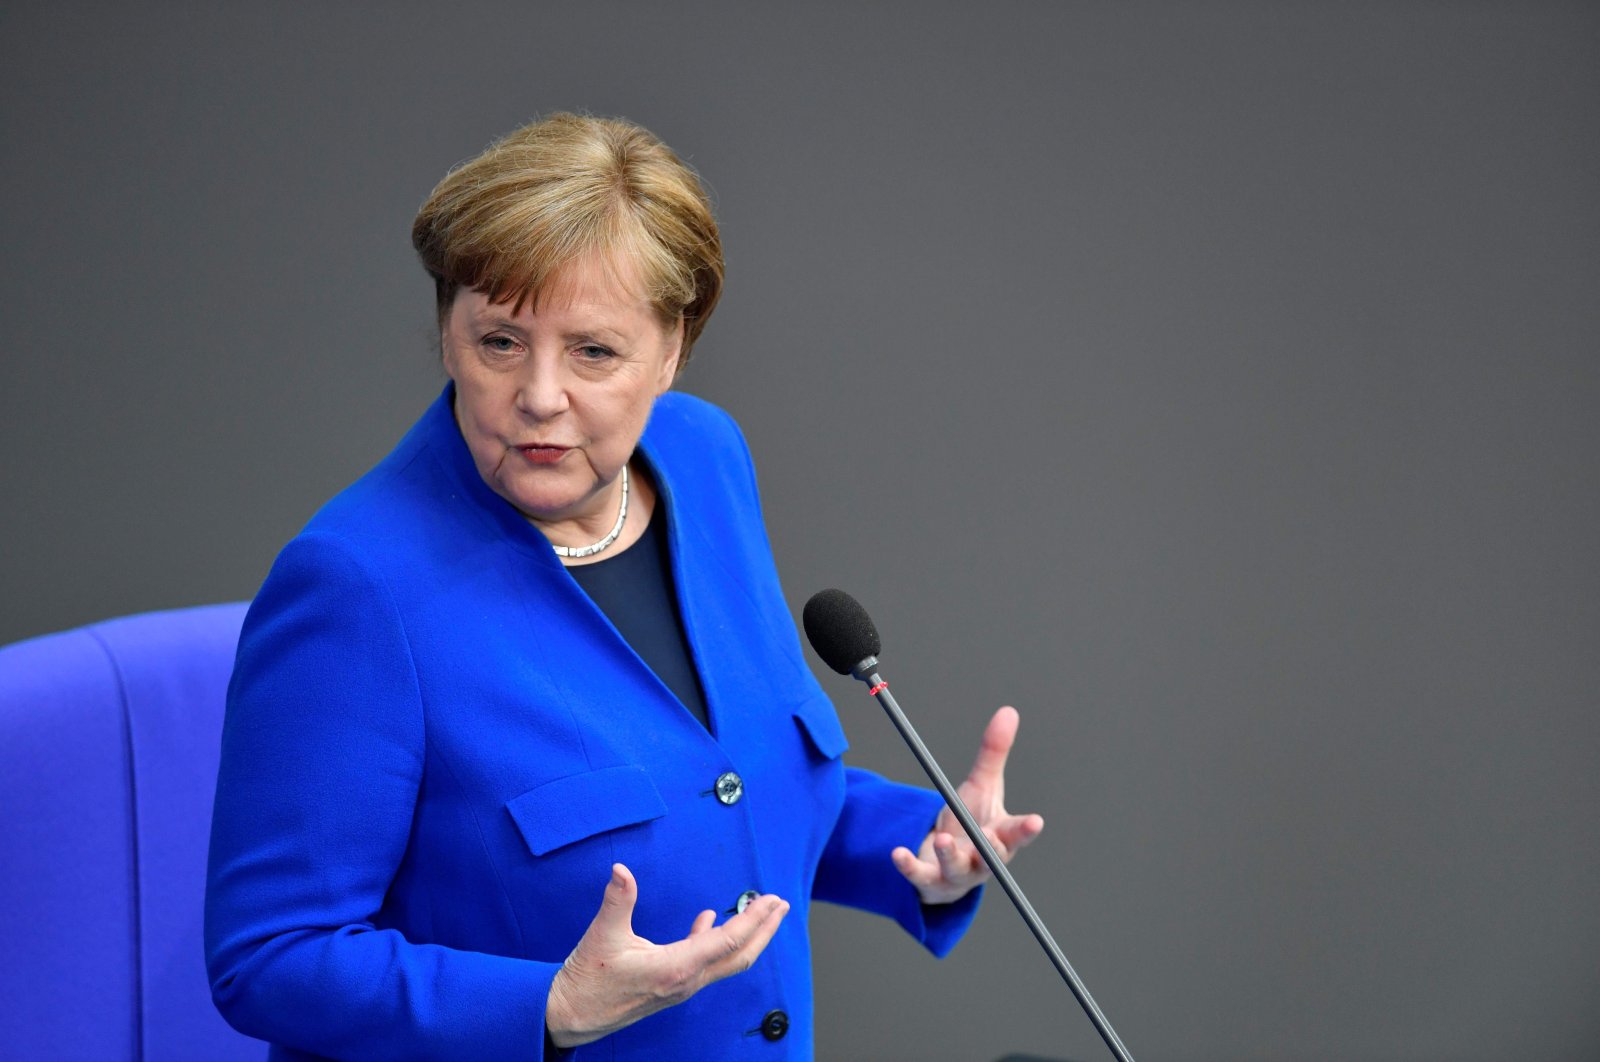 German Chancellor Angela Merkel speaks as she answers questions of parliament members at the Bundestag, the lower house of Parliament, Berlin, Germany, May 13, 2020. (AFP Photo)